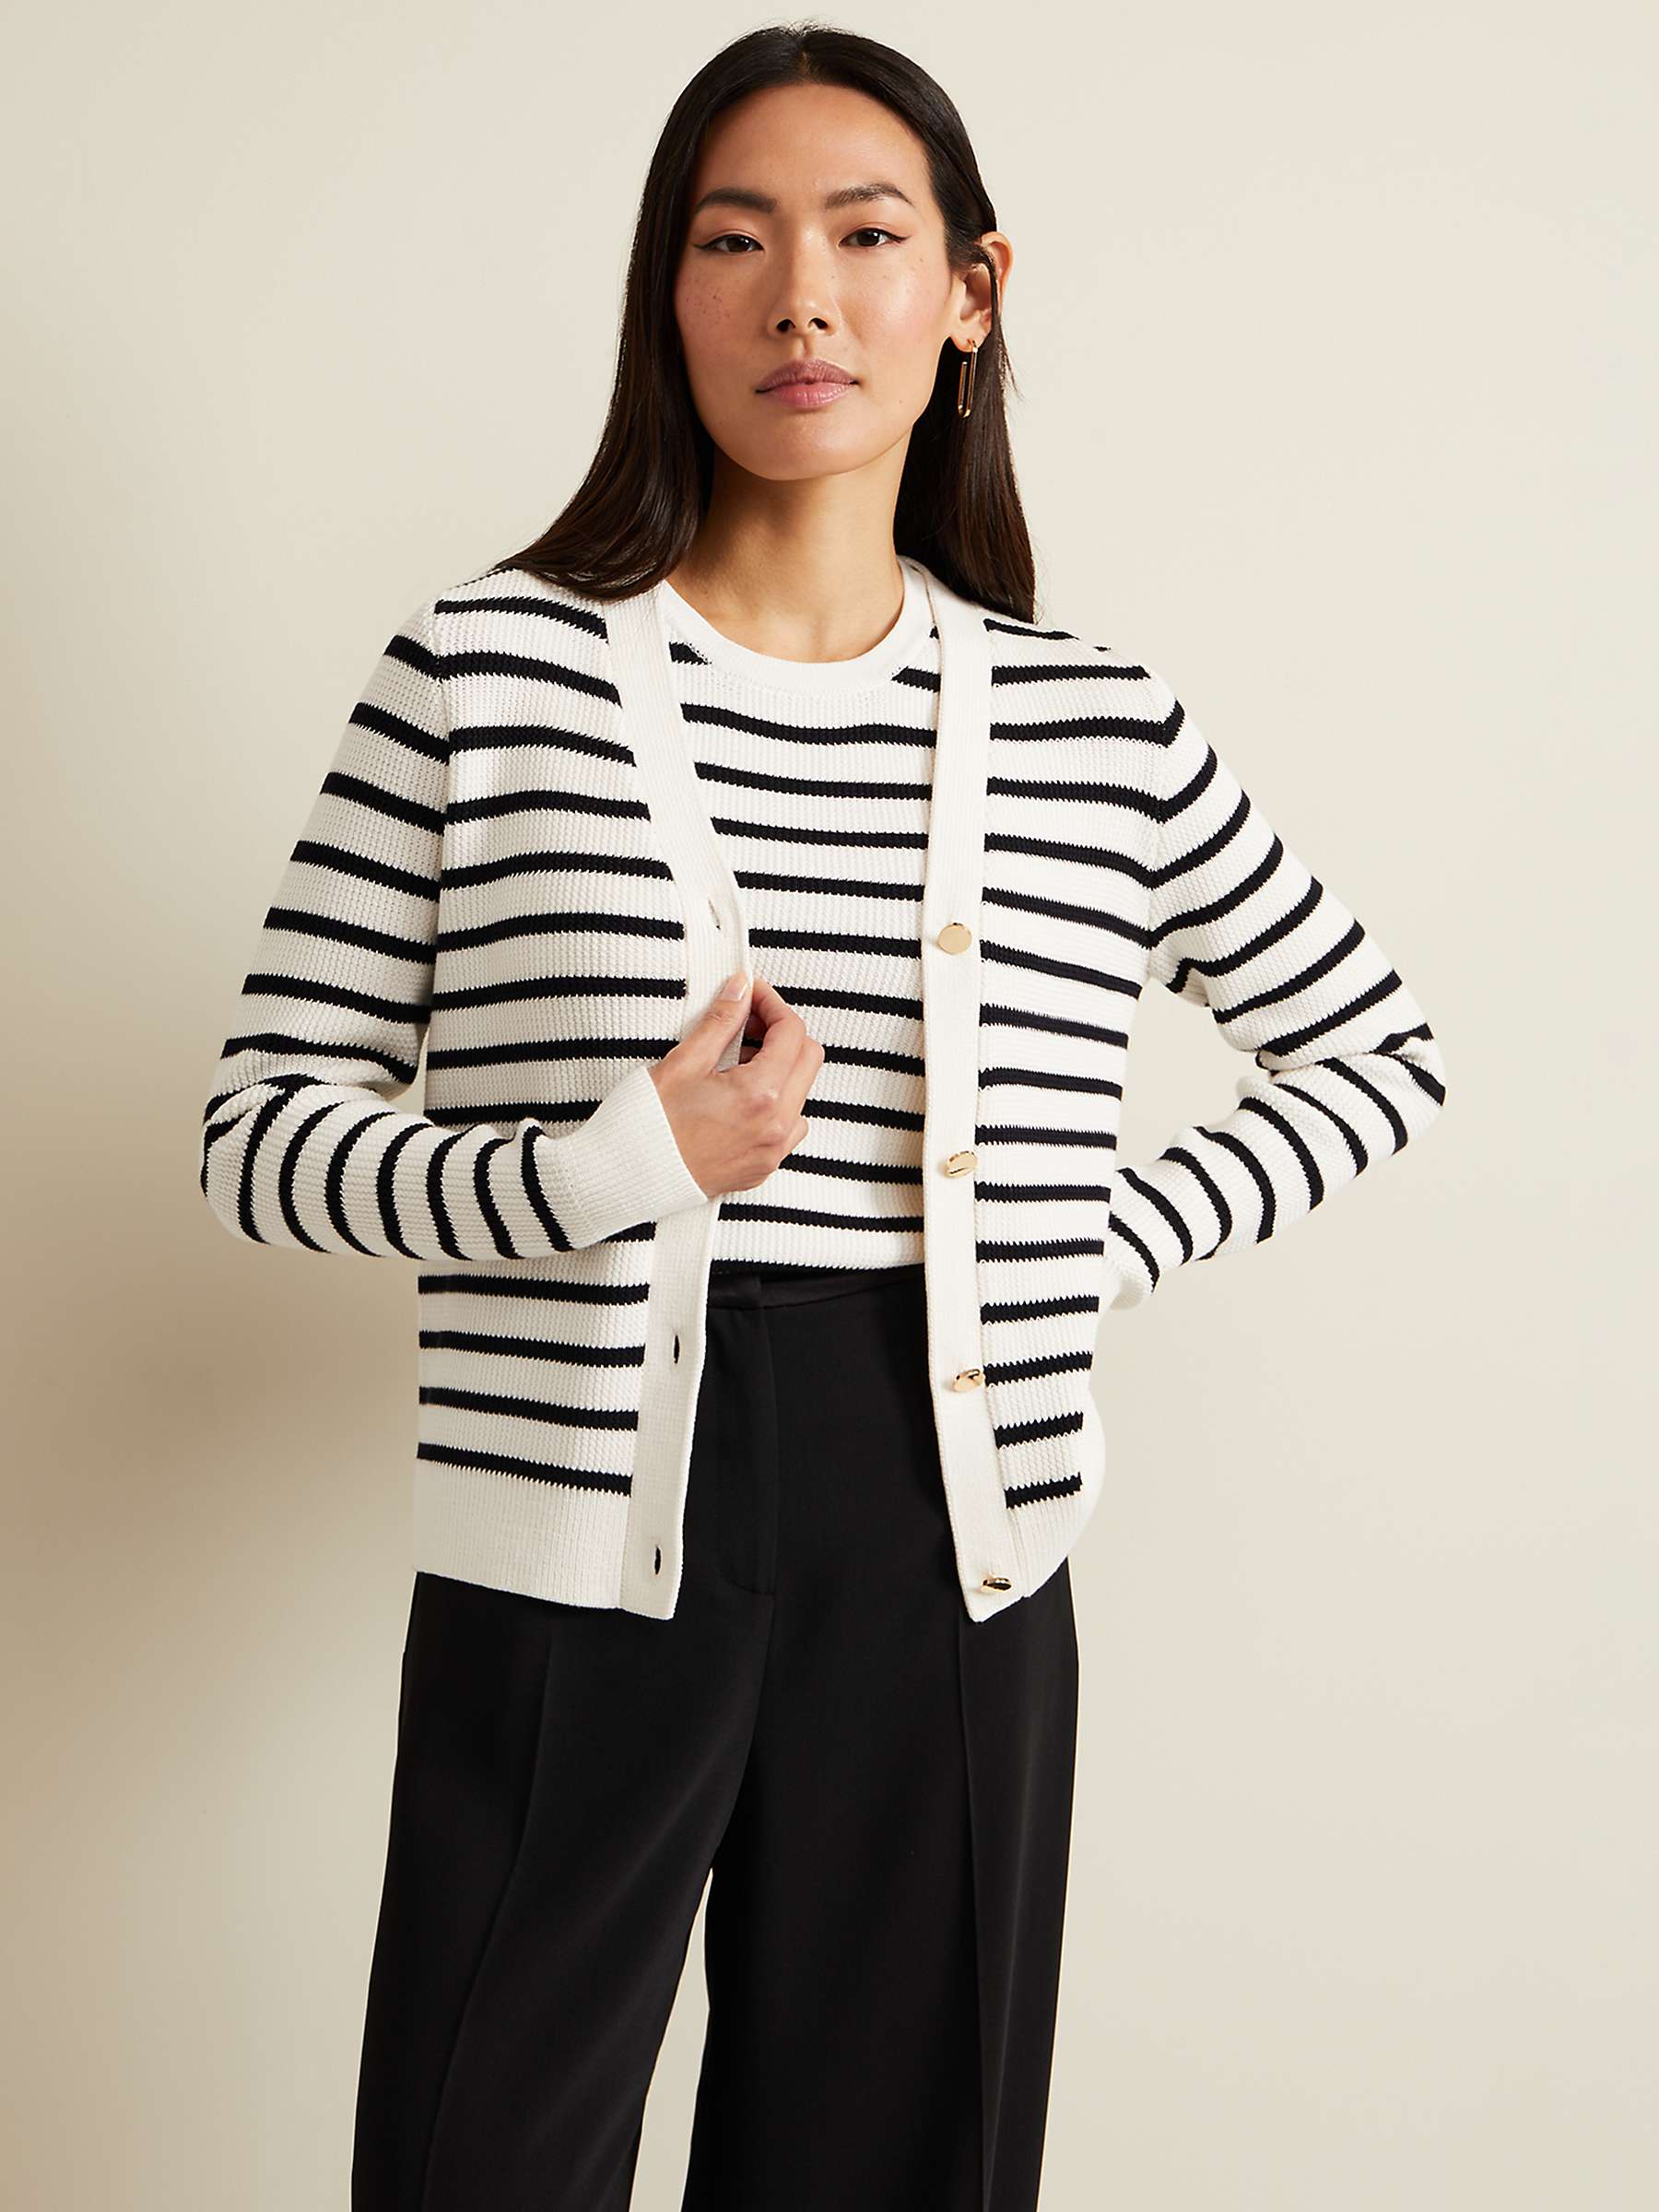 Buy Phase Eight Chloe Cotton Blend Cardigan, Ivory/Navy Online at johnlewis.com